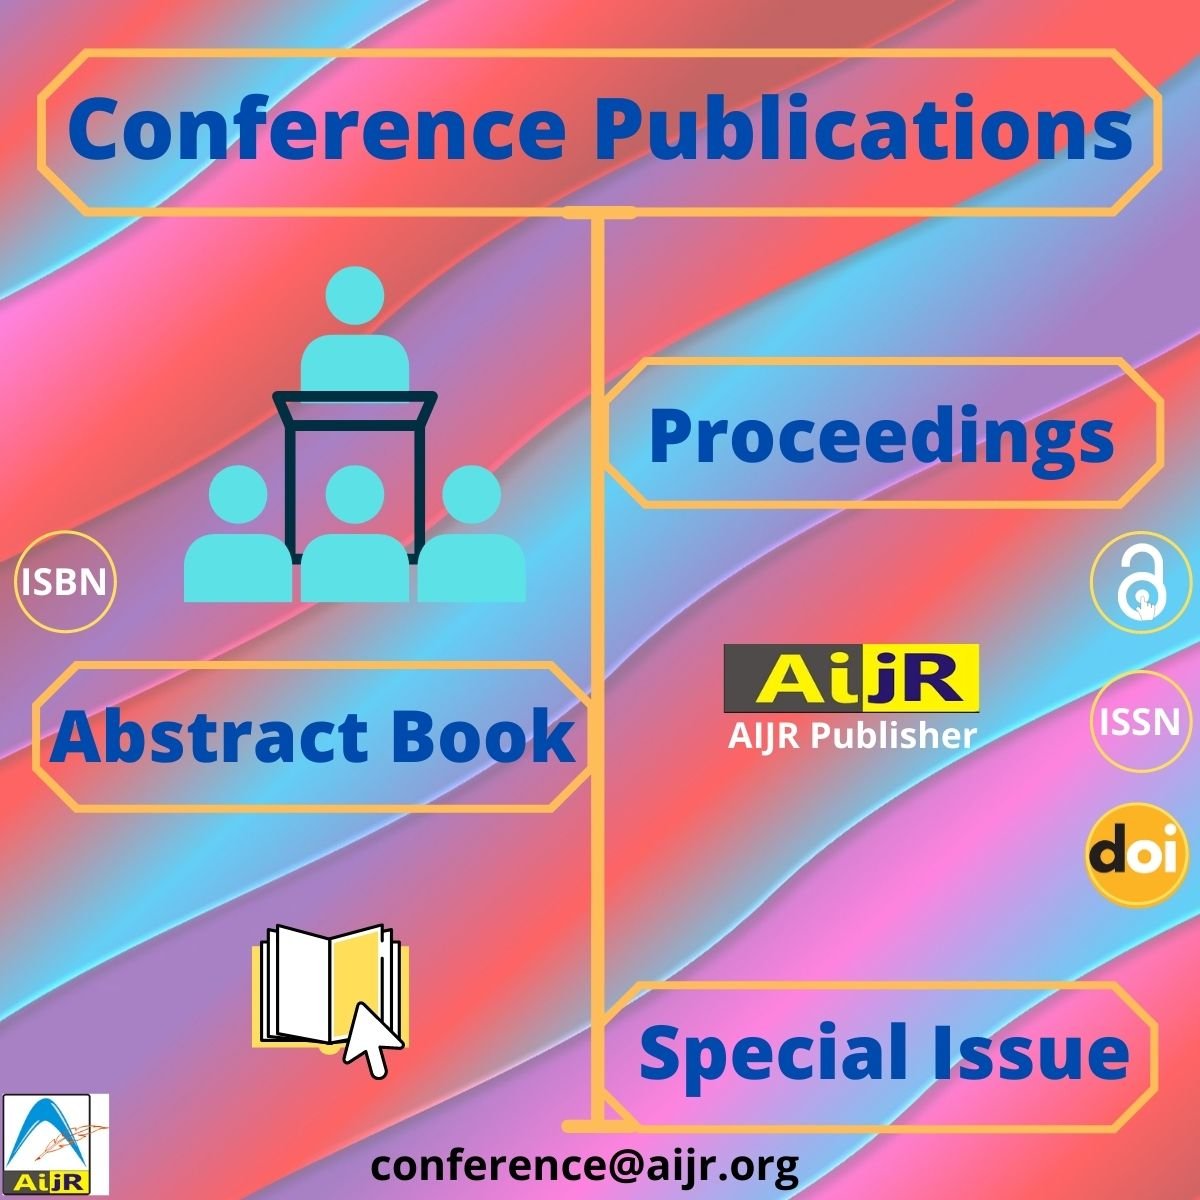 are conference presentations considered publications